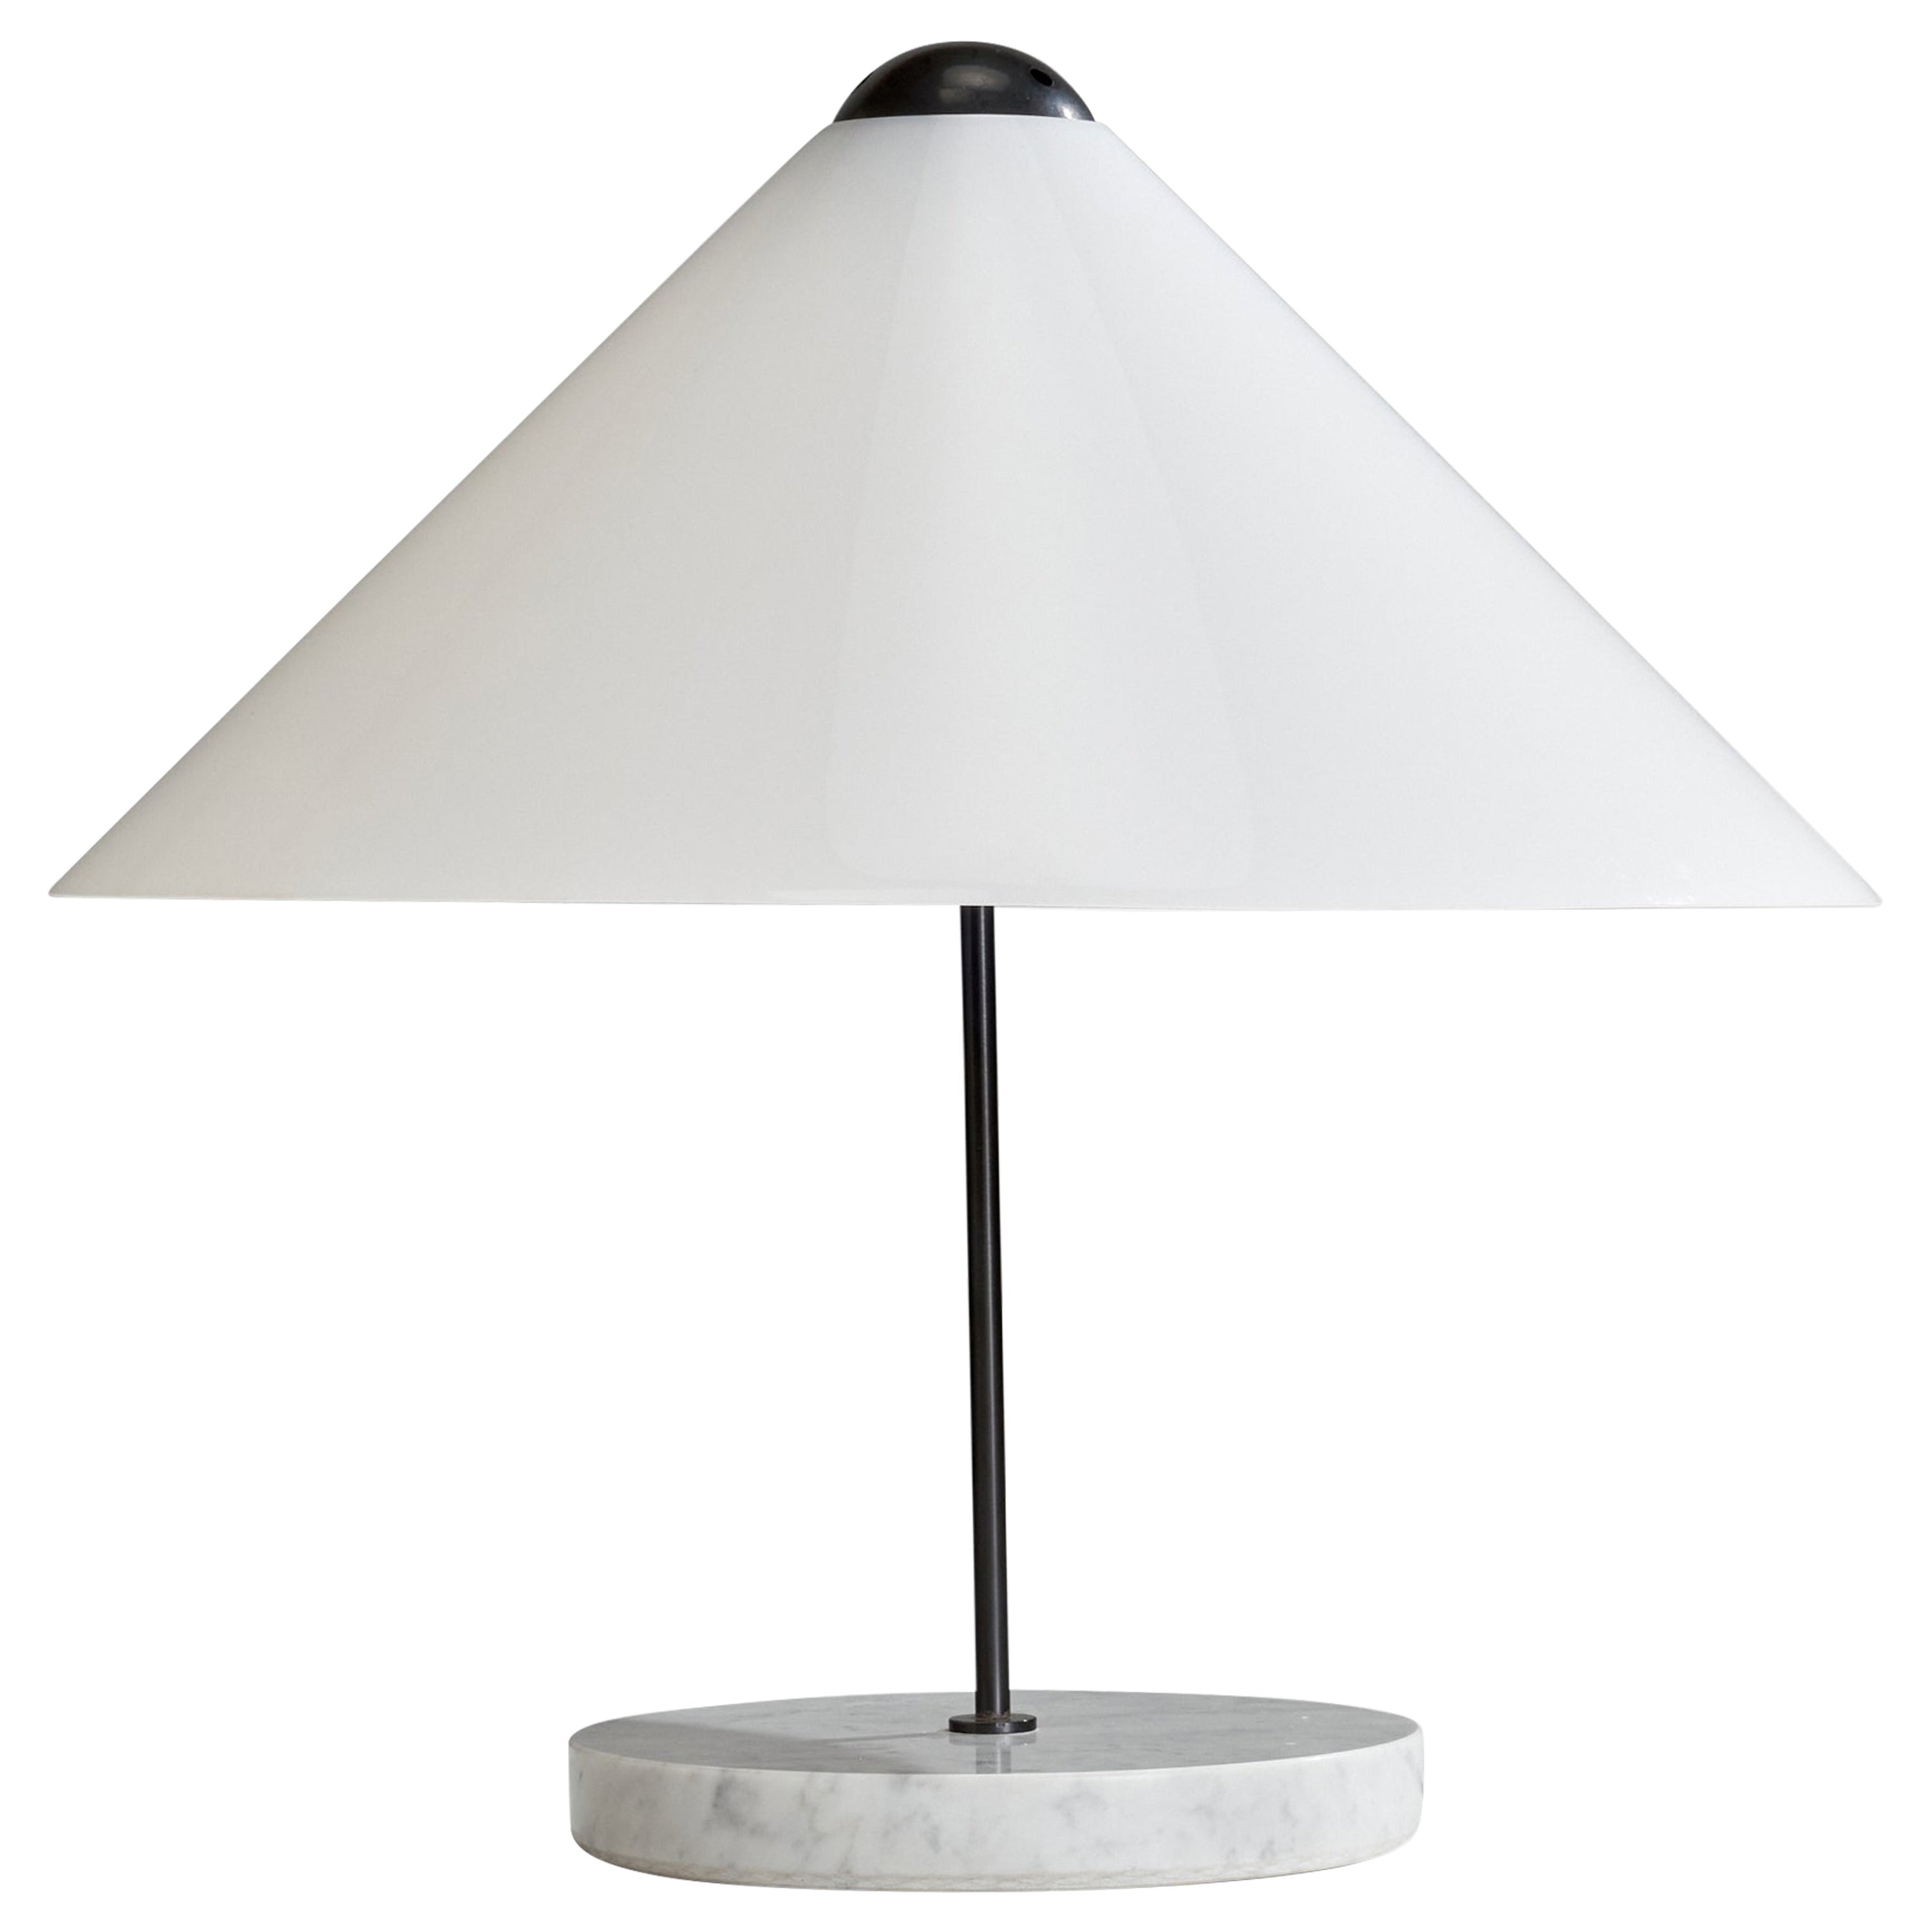 Vico Magistretti, "Snow" Table Lamp, Metal, Acrylic, Marble, Italy, 1973 For Sale